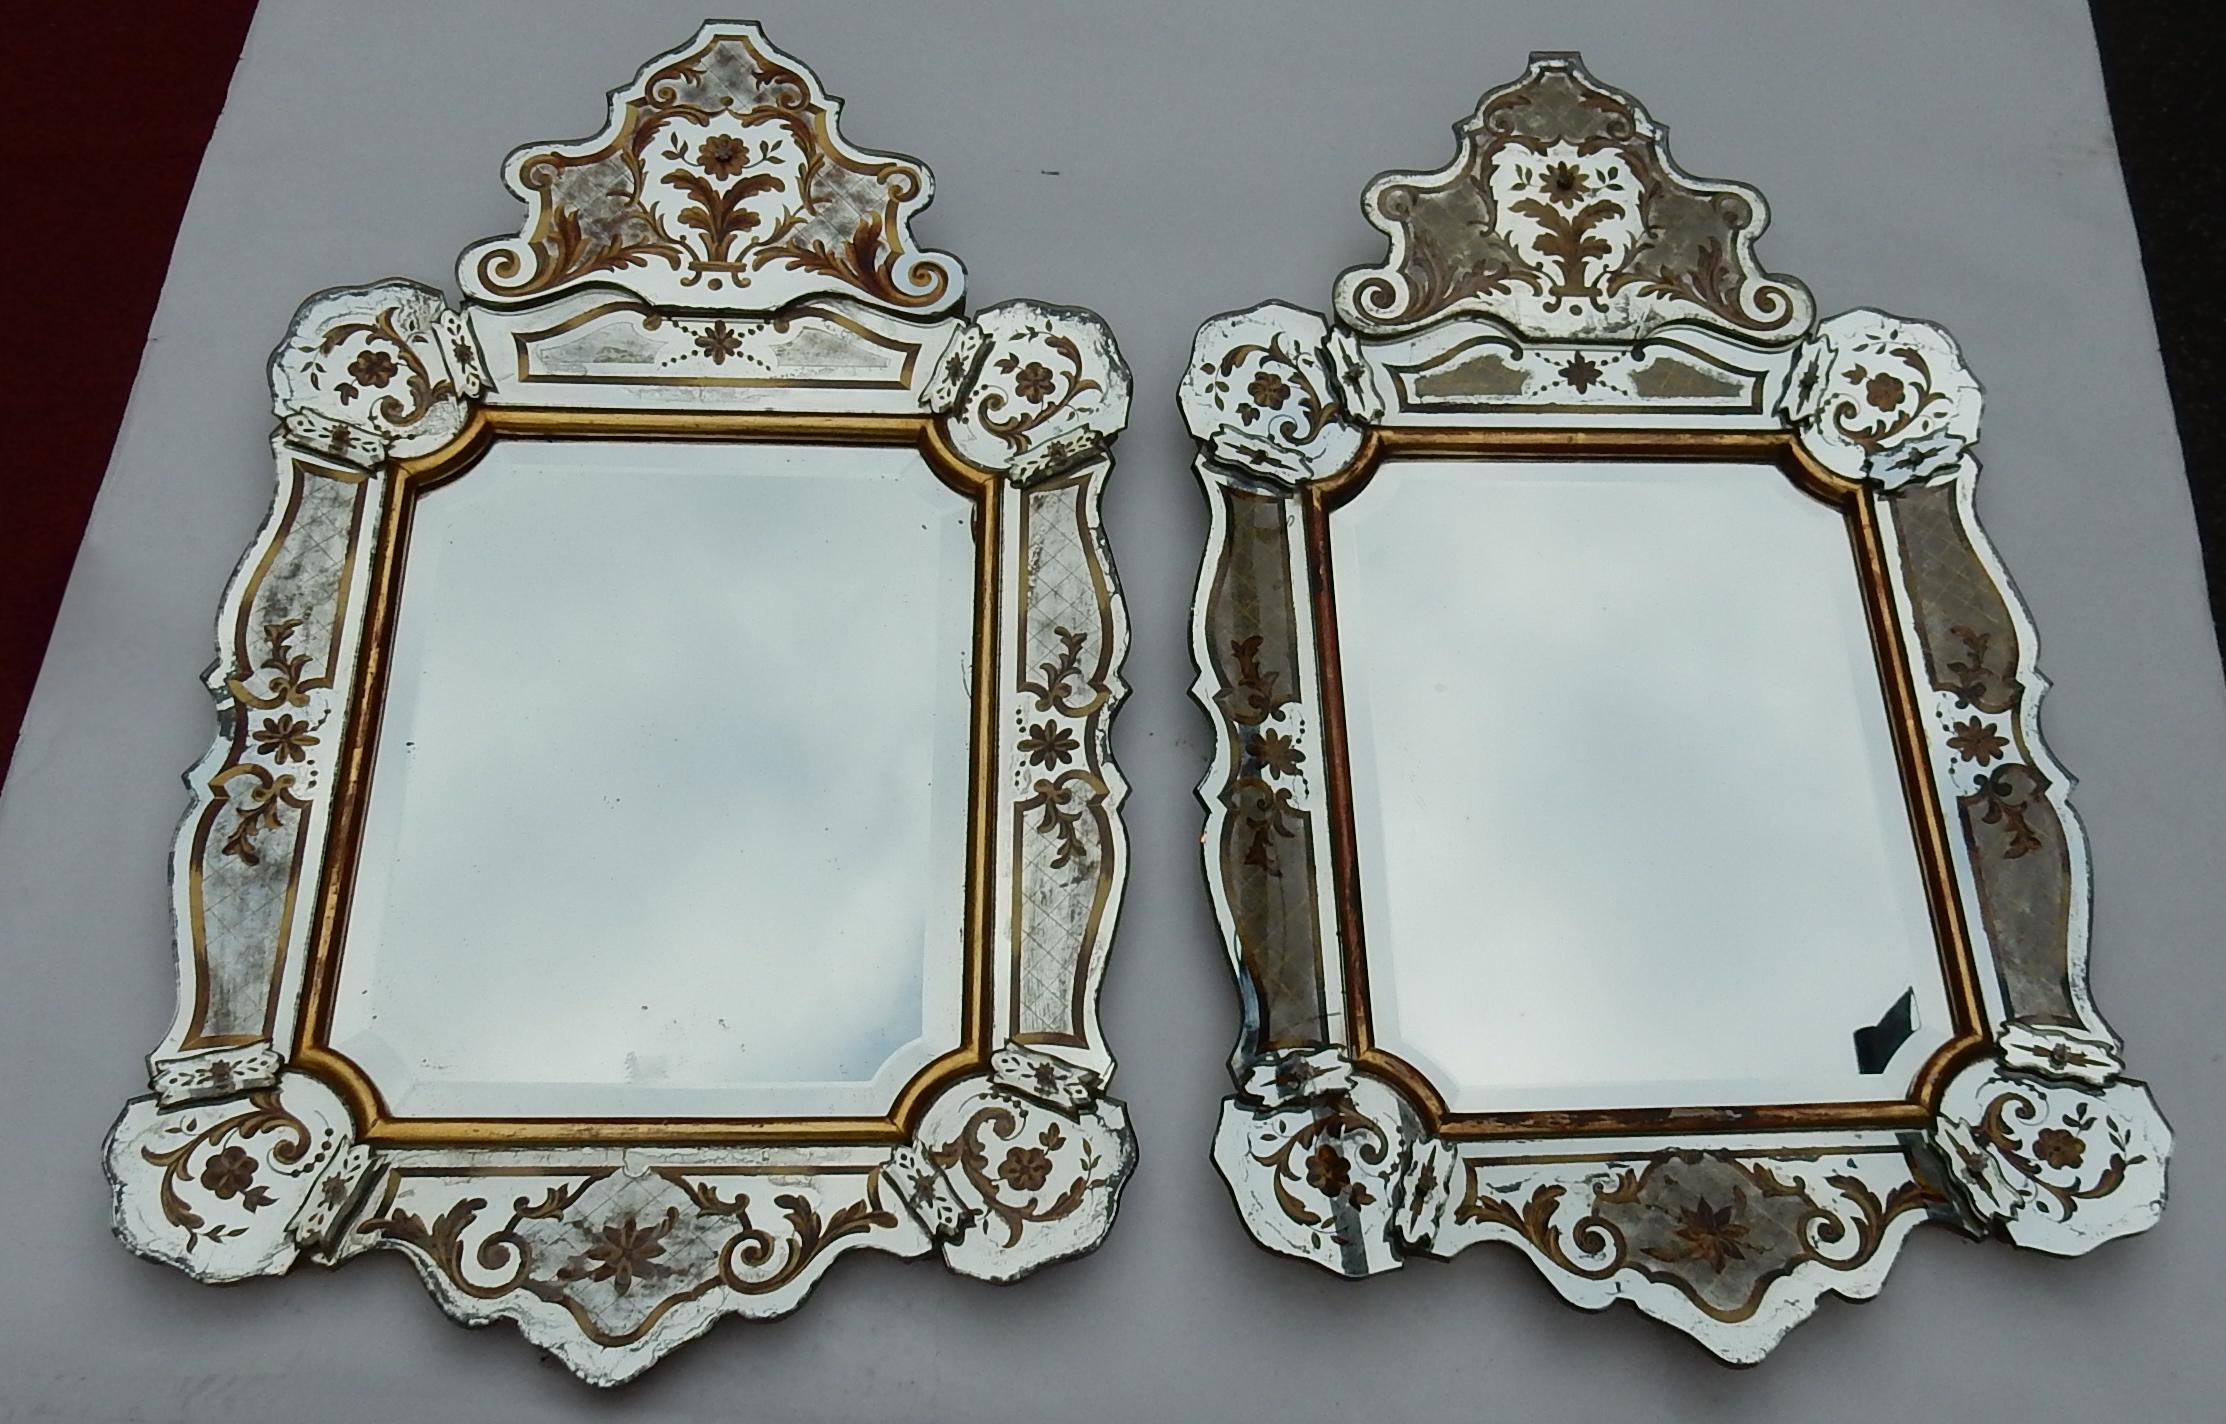 Neoclassical 1950-1970 Pair of Mirrors with Decors Eglomised